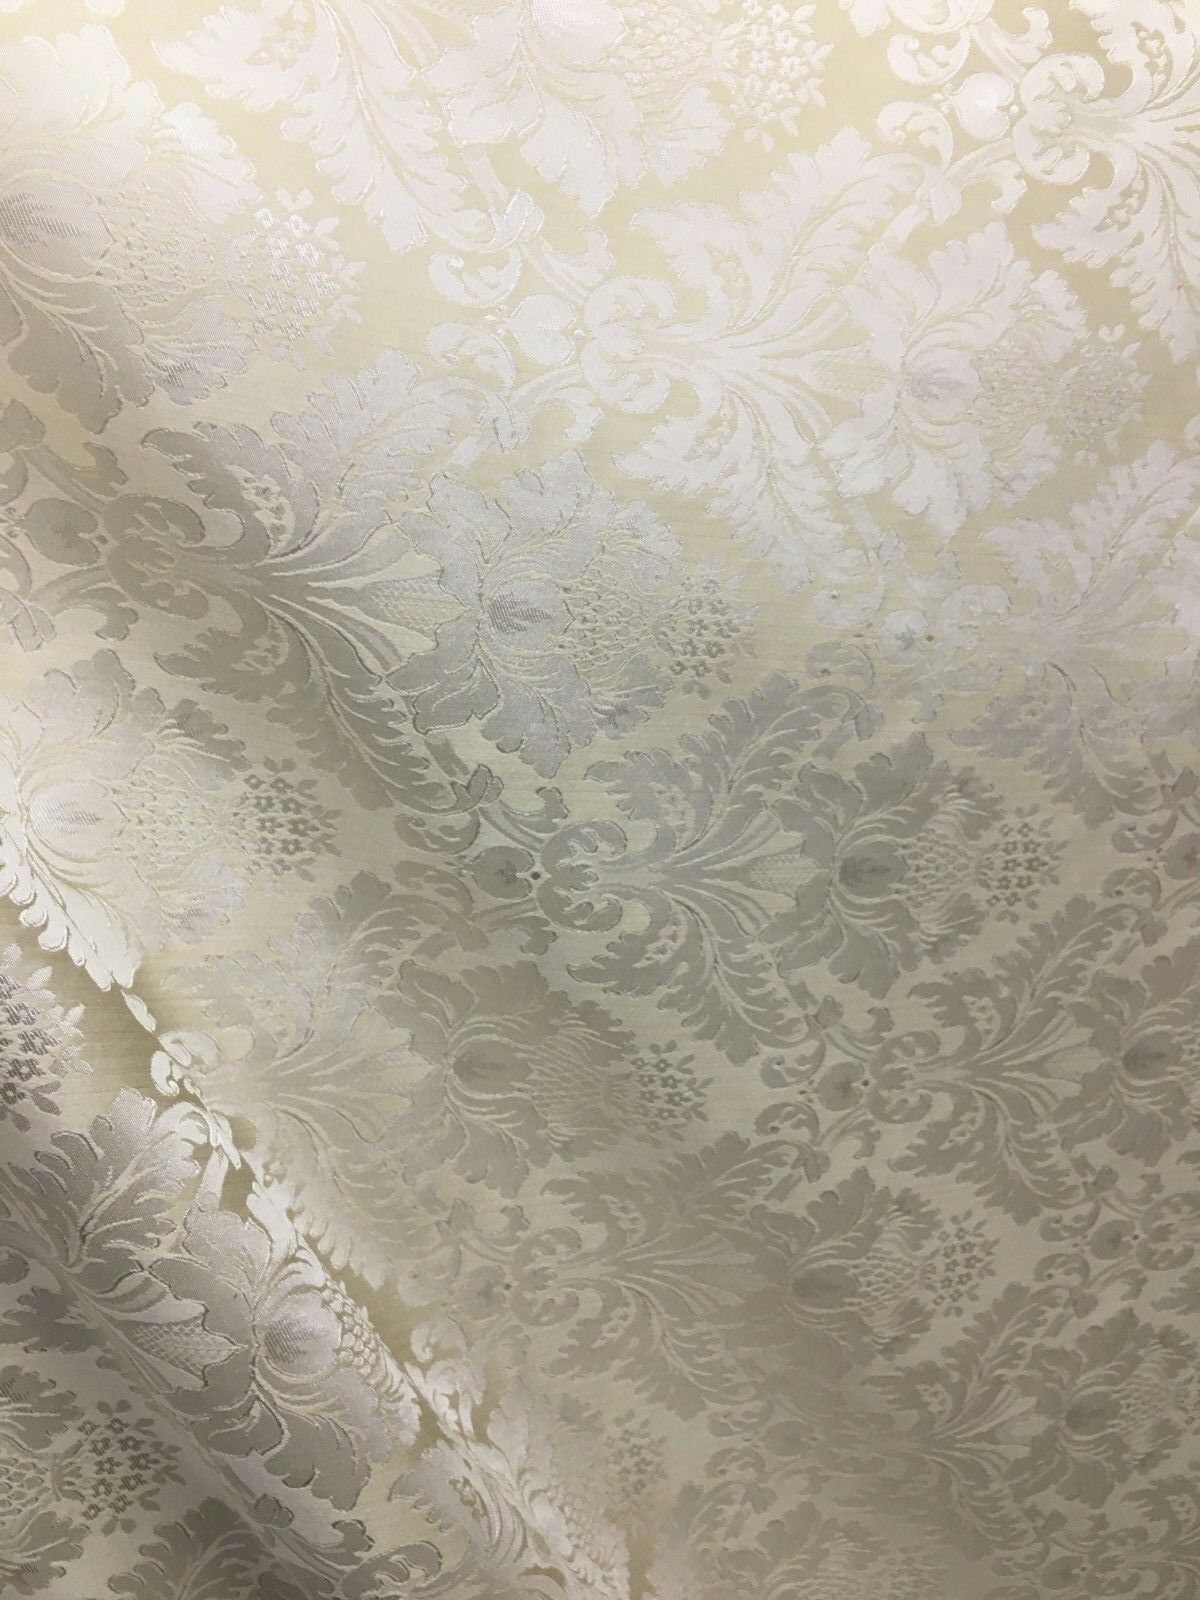 IVORY Damask Jacquard Brocade Flower Floral Fabric (110 in.) Sold By The Yard